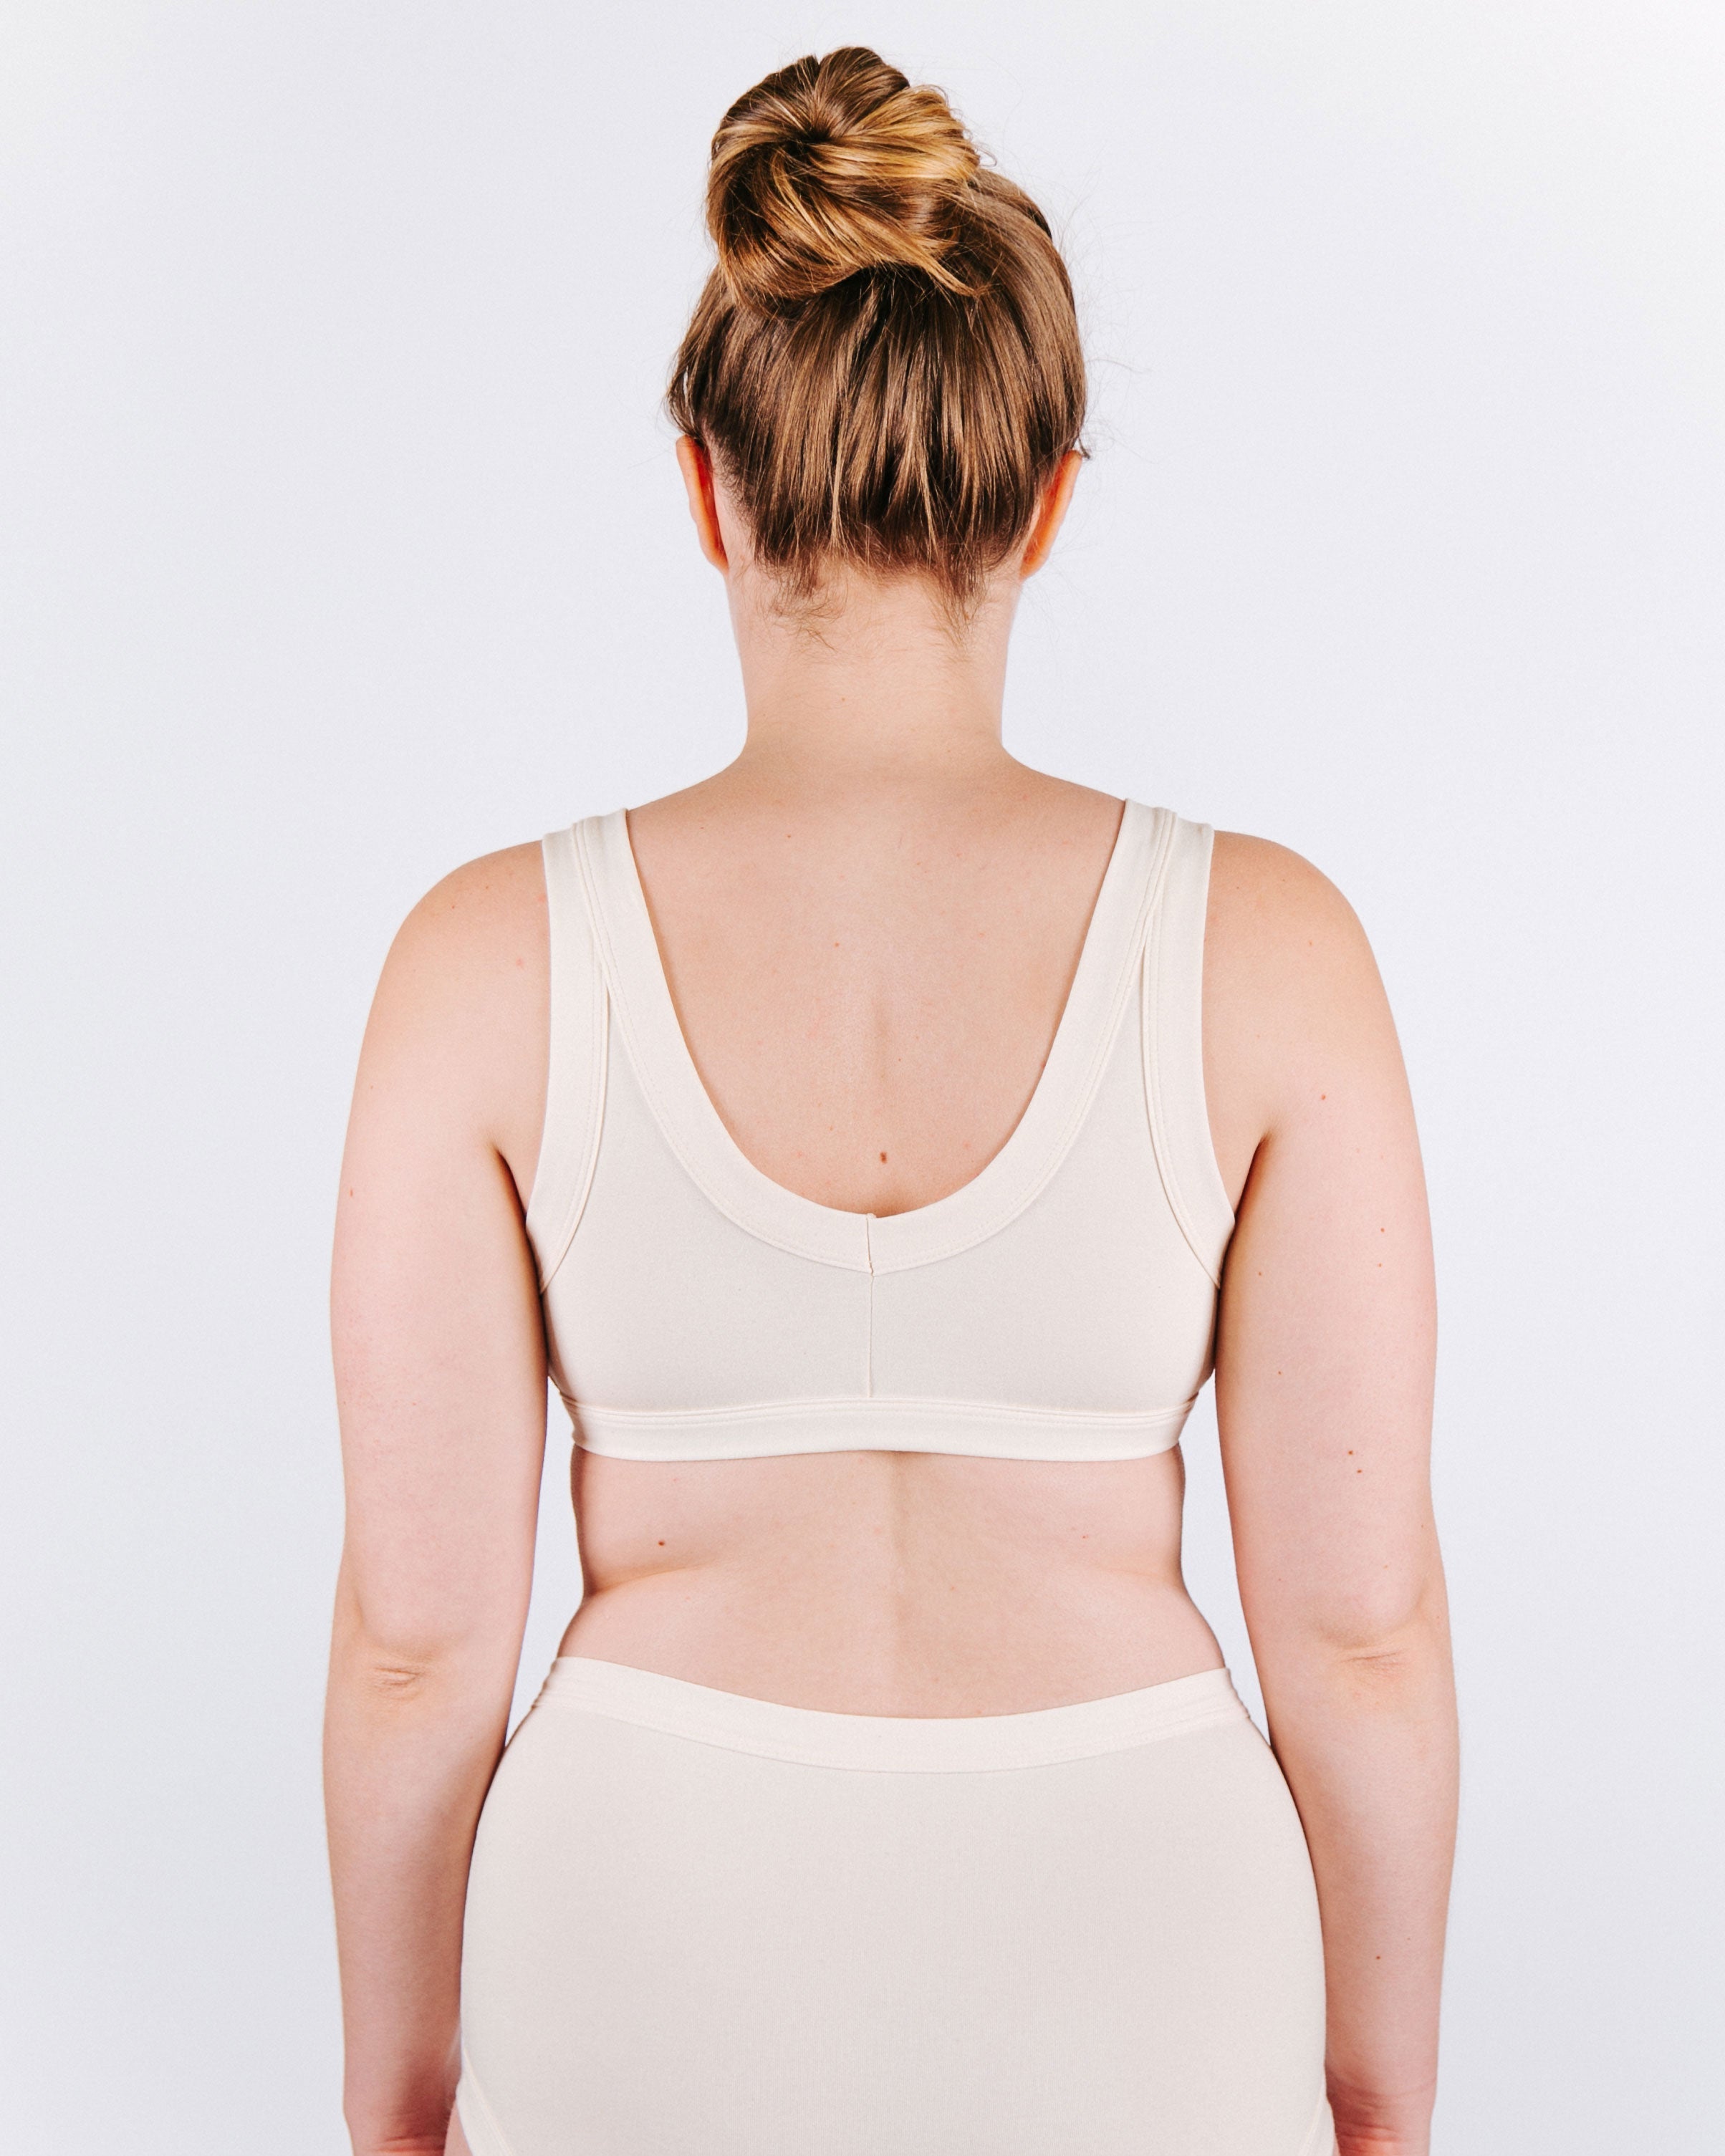 Fit photo from the back of Thunderpants organic cotton Bralette and Original Style underwear in off-white on a model.